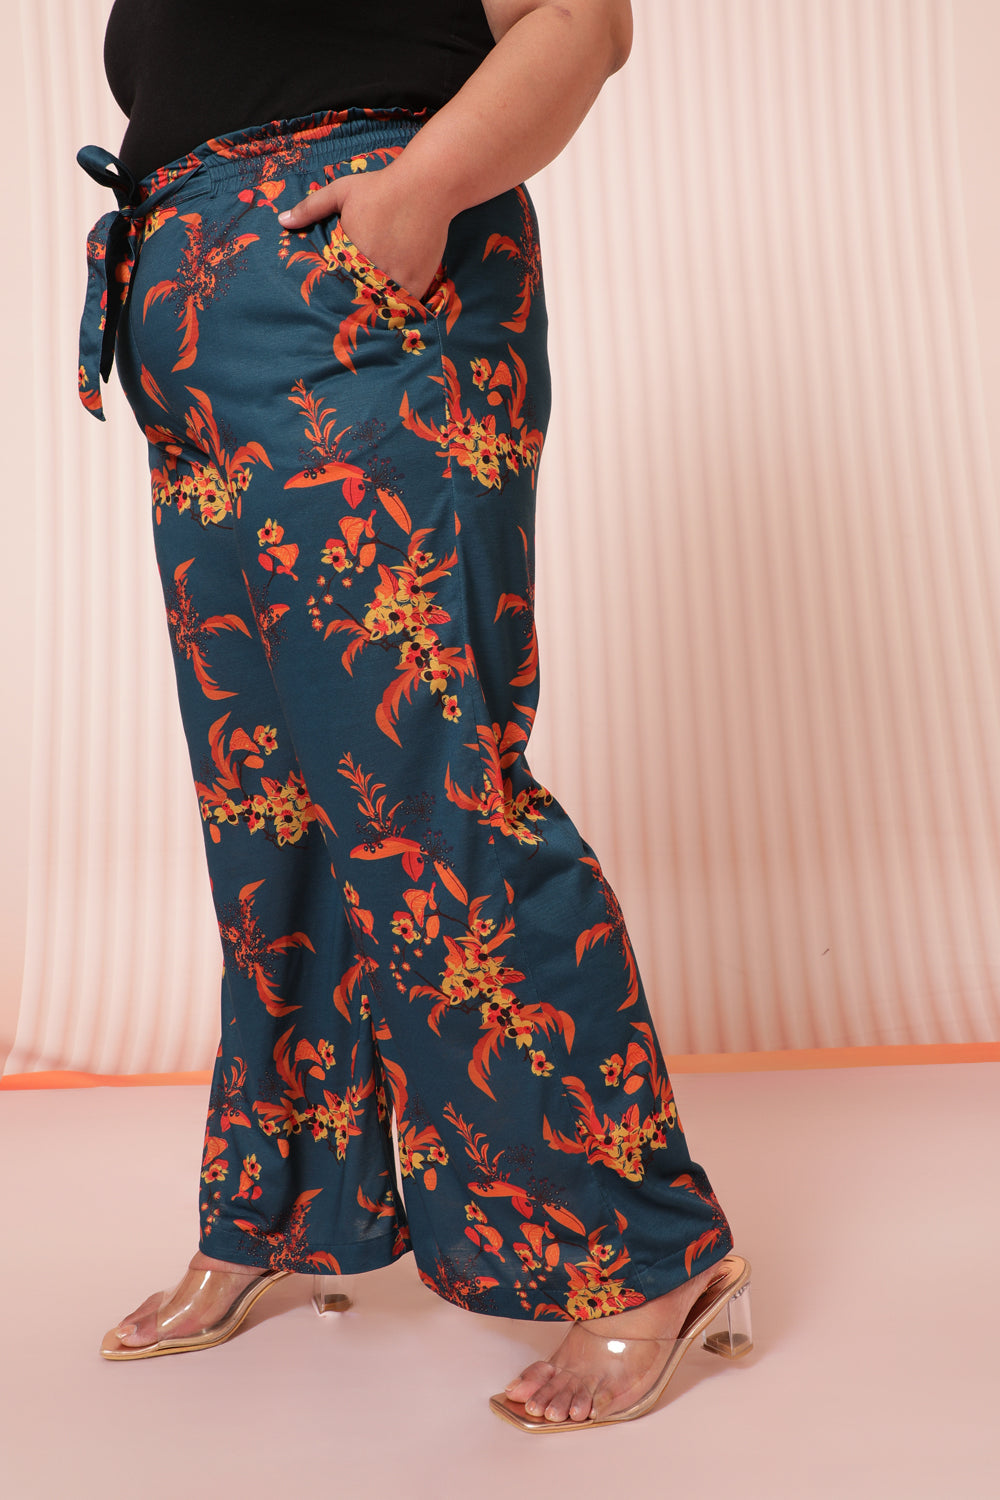 Plus Size Teal Red Floral High Waist Pants